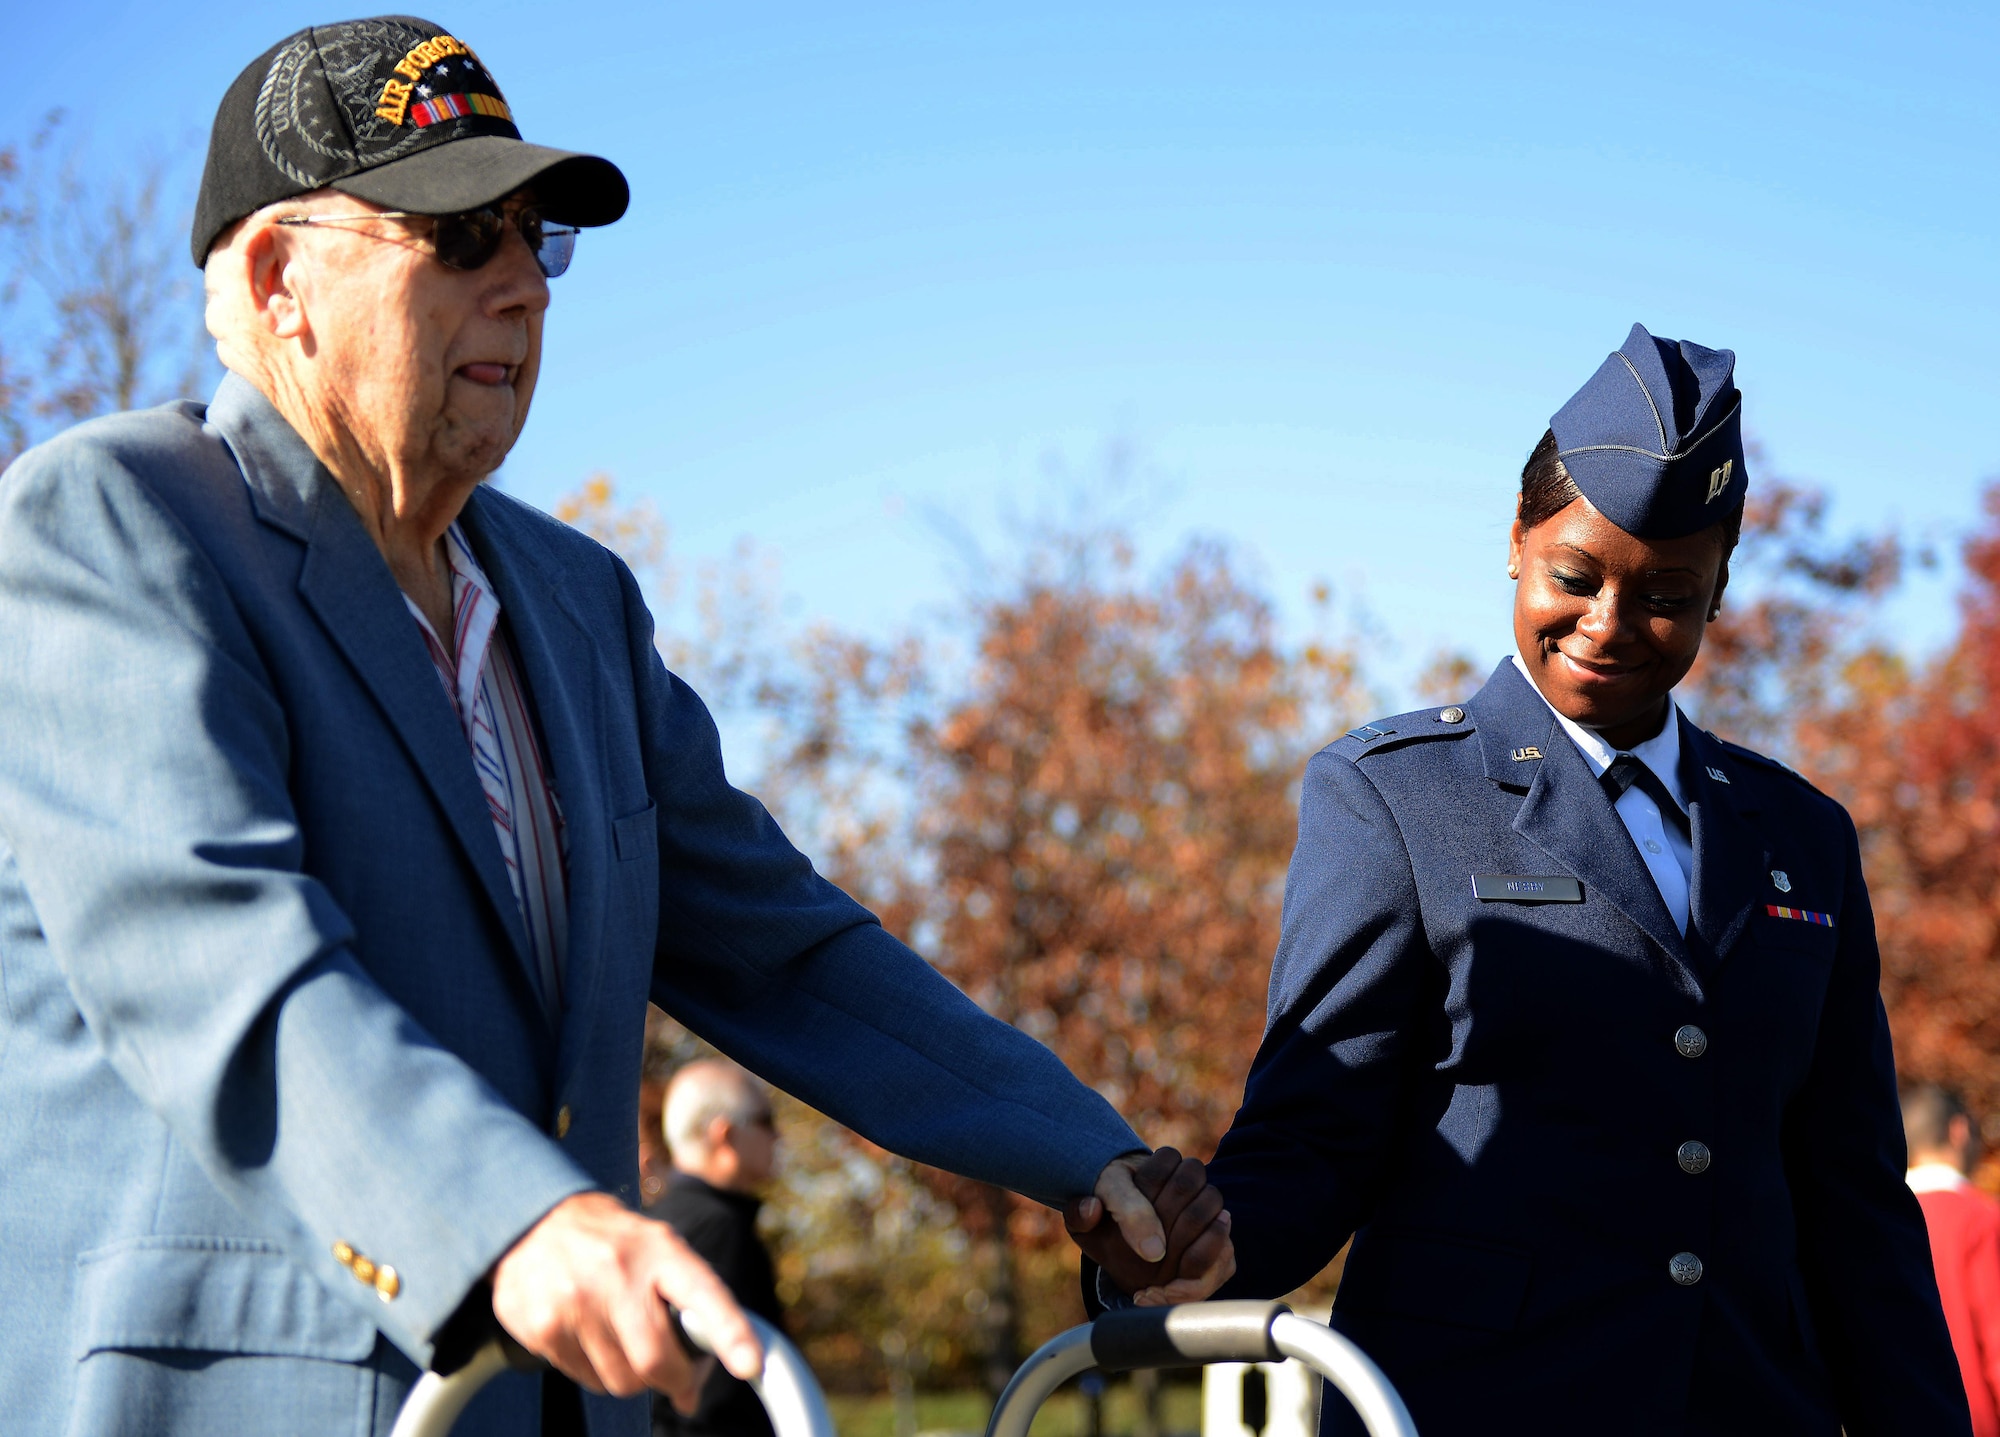 Capt. Natosha Nesby, 779th Medical Operations Squadron, Andrews Air Force Base, Md., escorts an Air Force veteran during a  Veterans Day wreath laying ceremony, Nov. 11, 2013 at the Air Force Memorial in Arlington, Va. More than 100 veterans, service members, family members and supporters came out for the ceremony.